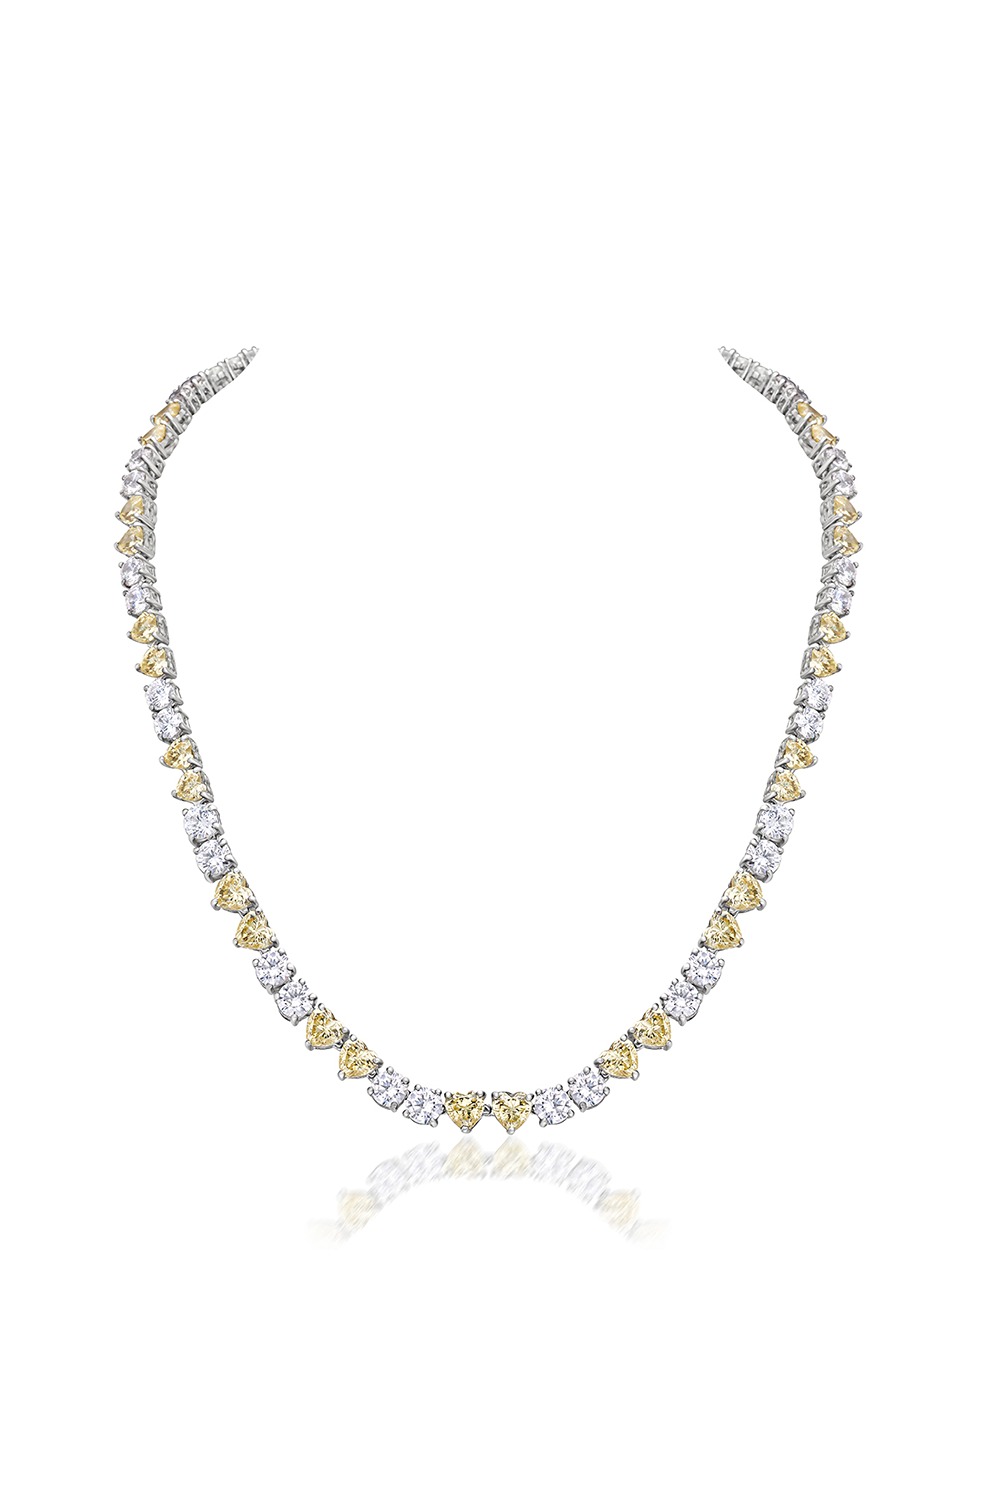 White & Yellow Solitaire Necklace